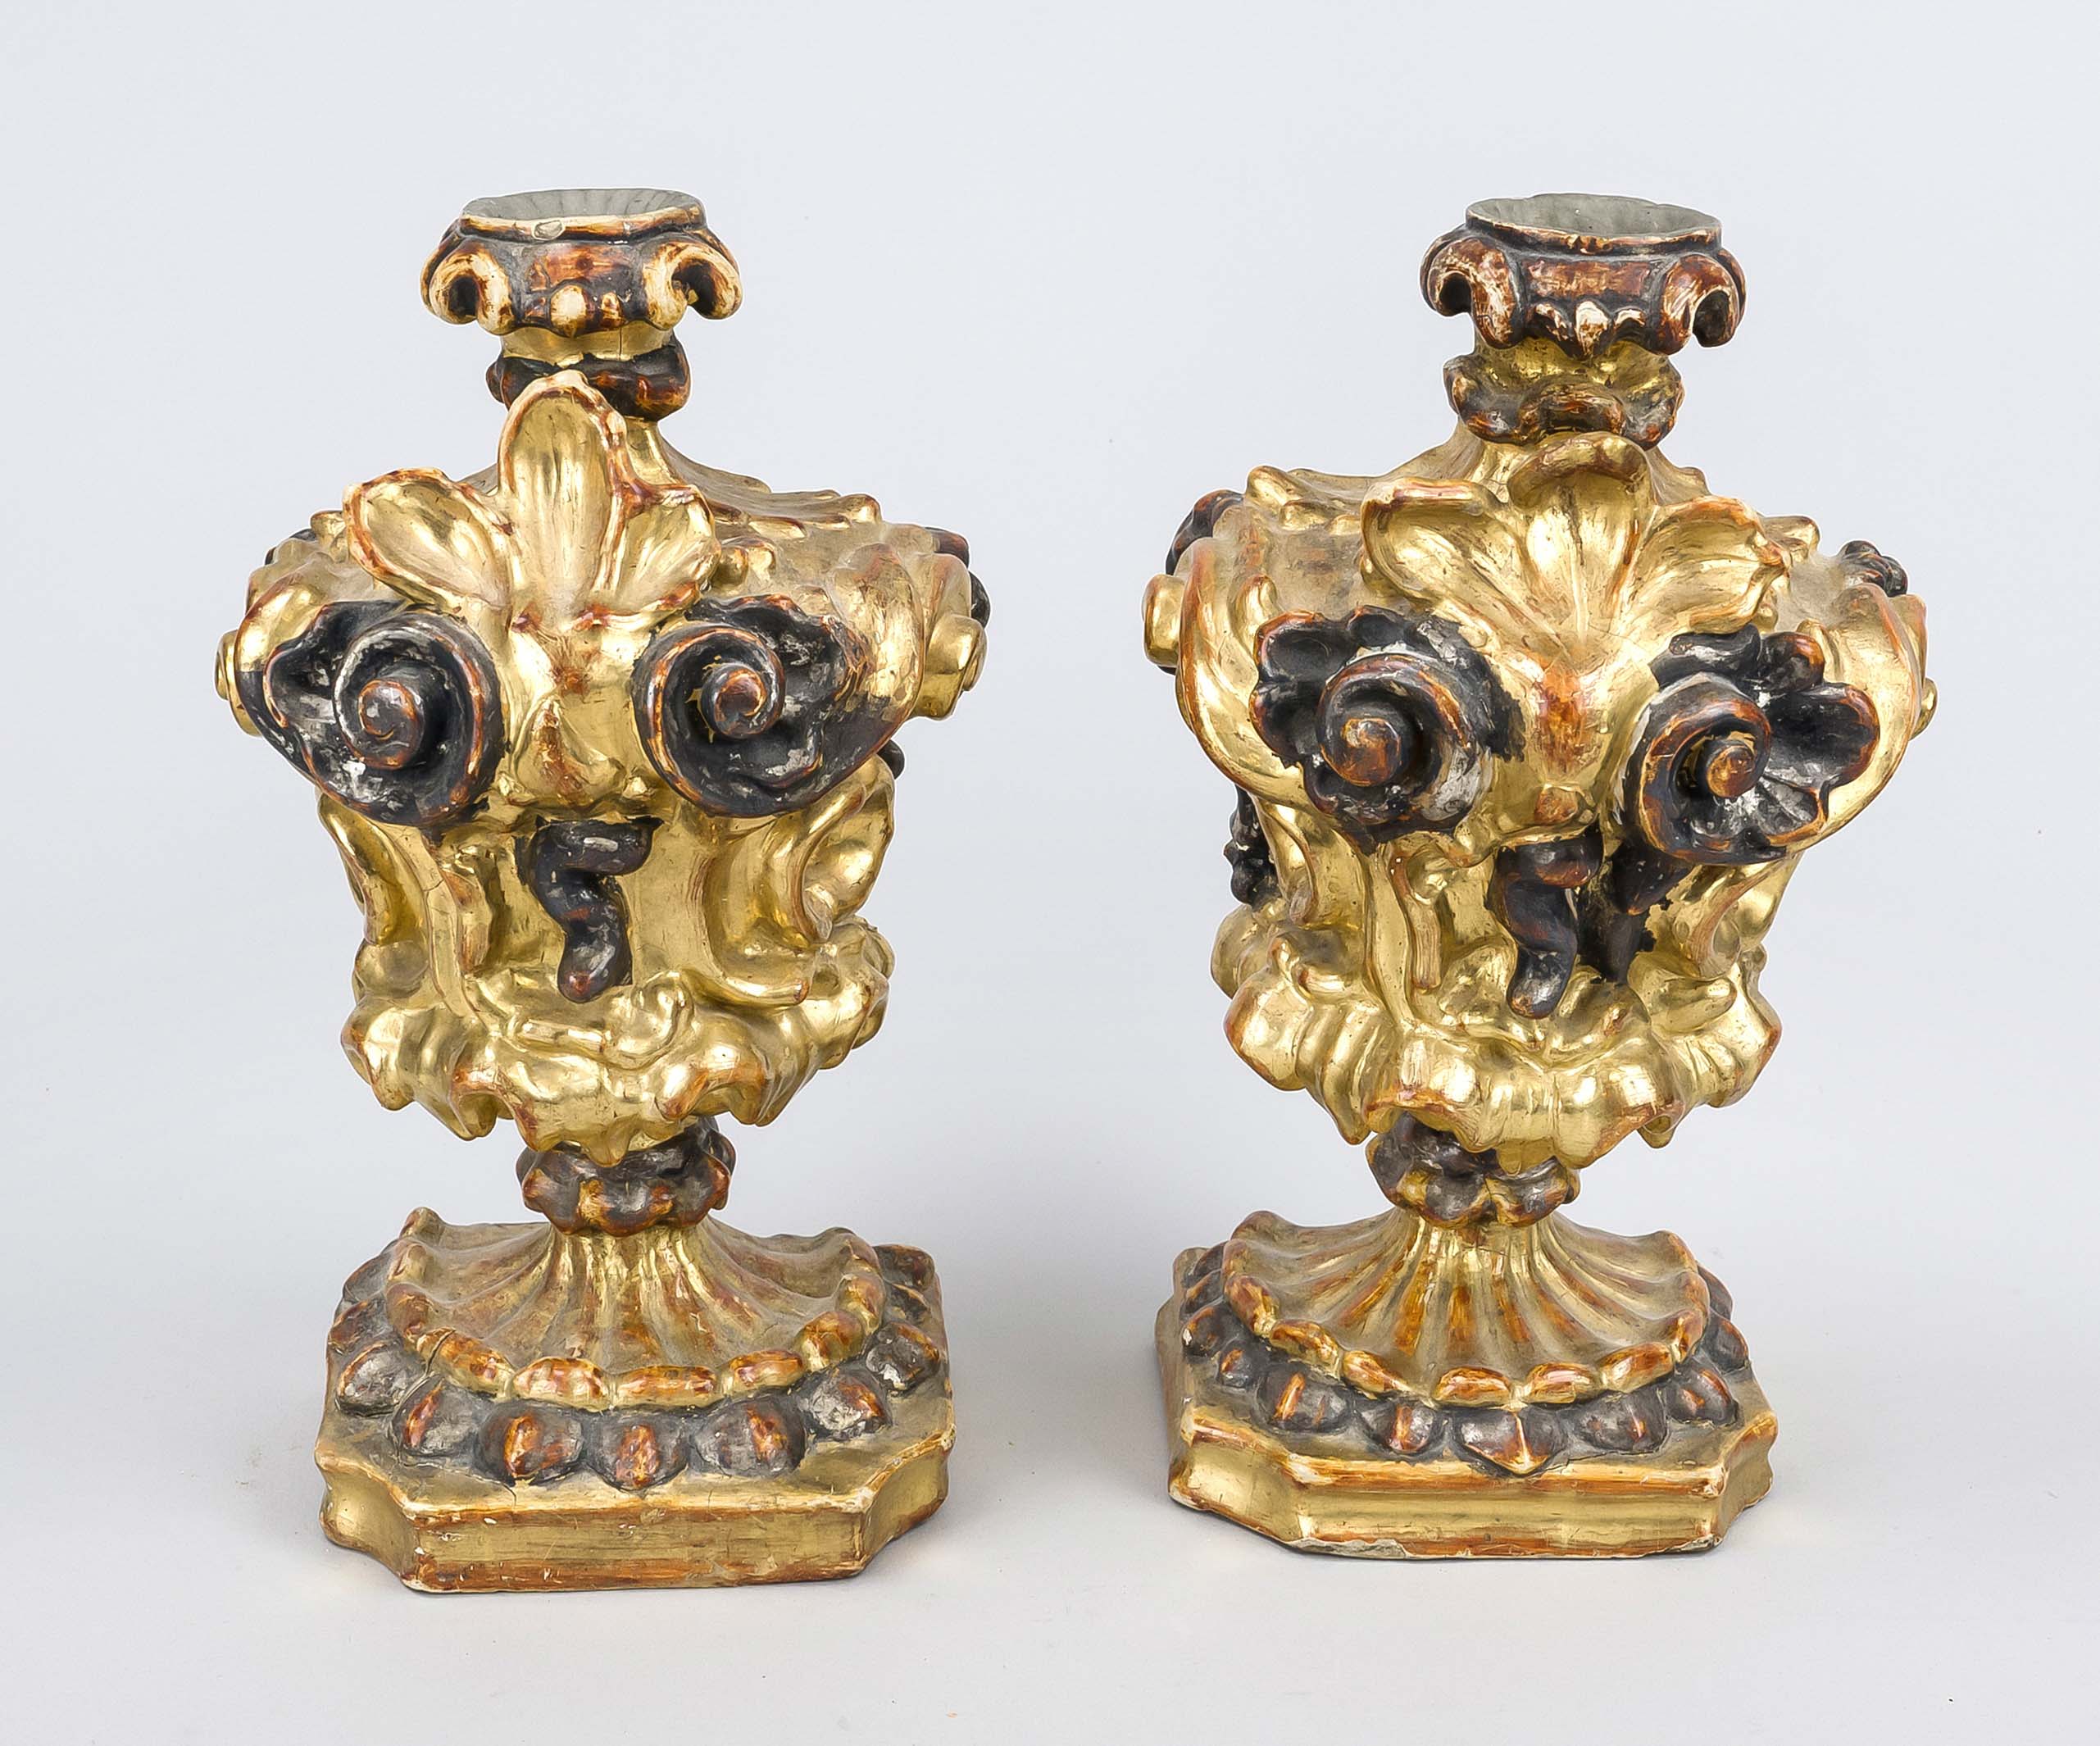 Pair of Baroque decorative wall vases, 18th century, carved, set and gilded wood, h. 31 cm